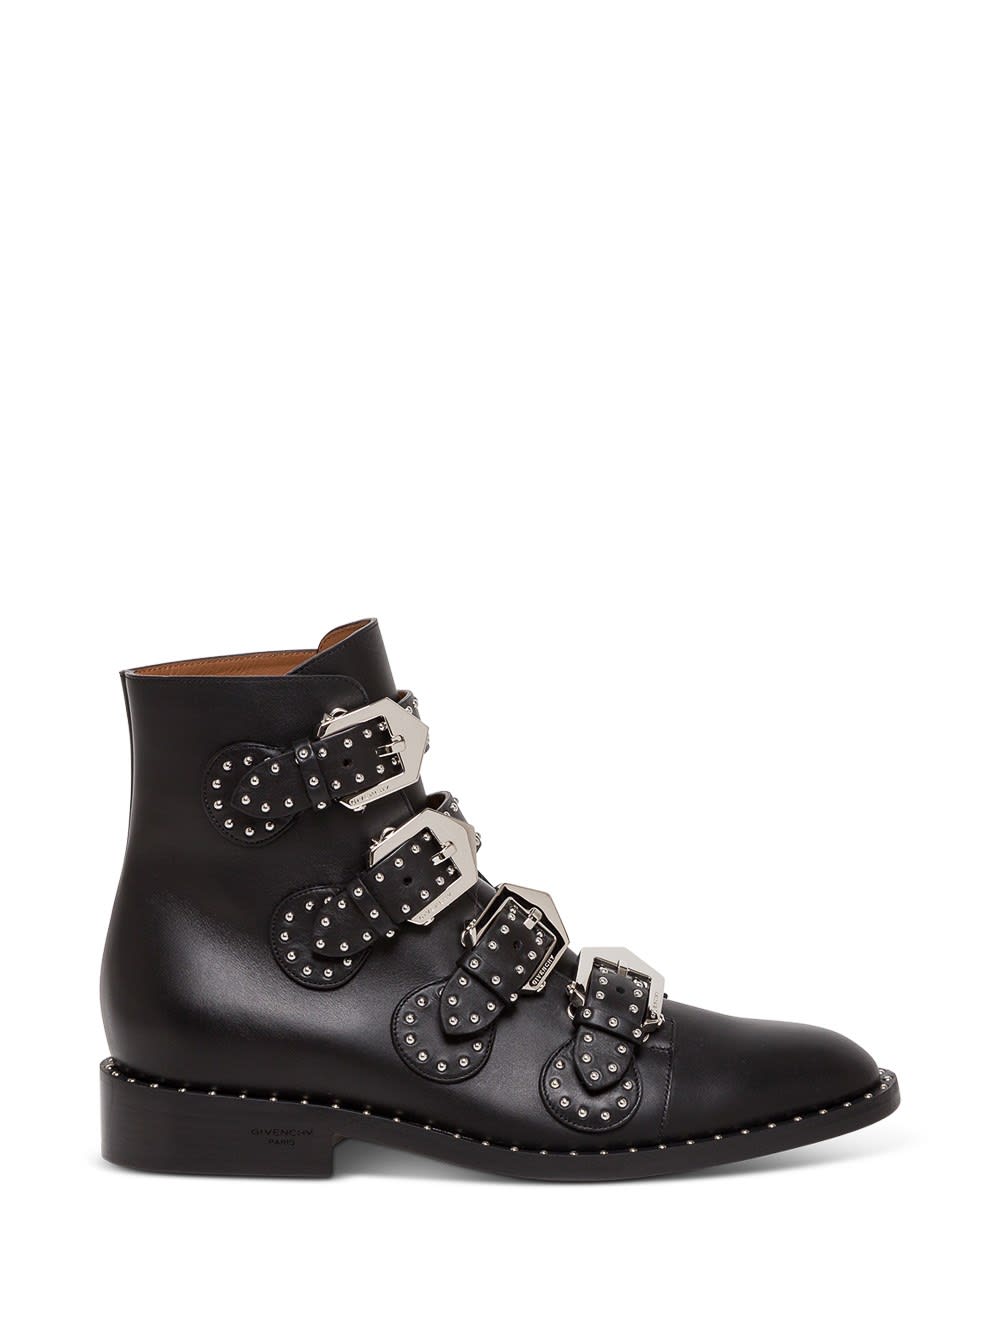 Buy Givenchy Black Lether Ankle Botts With Buckles And Studs Details online, shop Givenchy shoes with free shipping